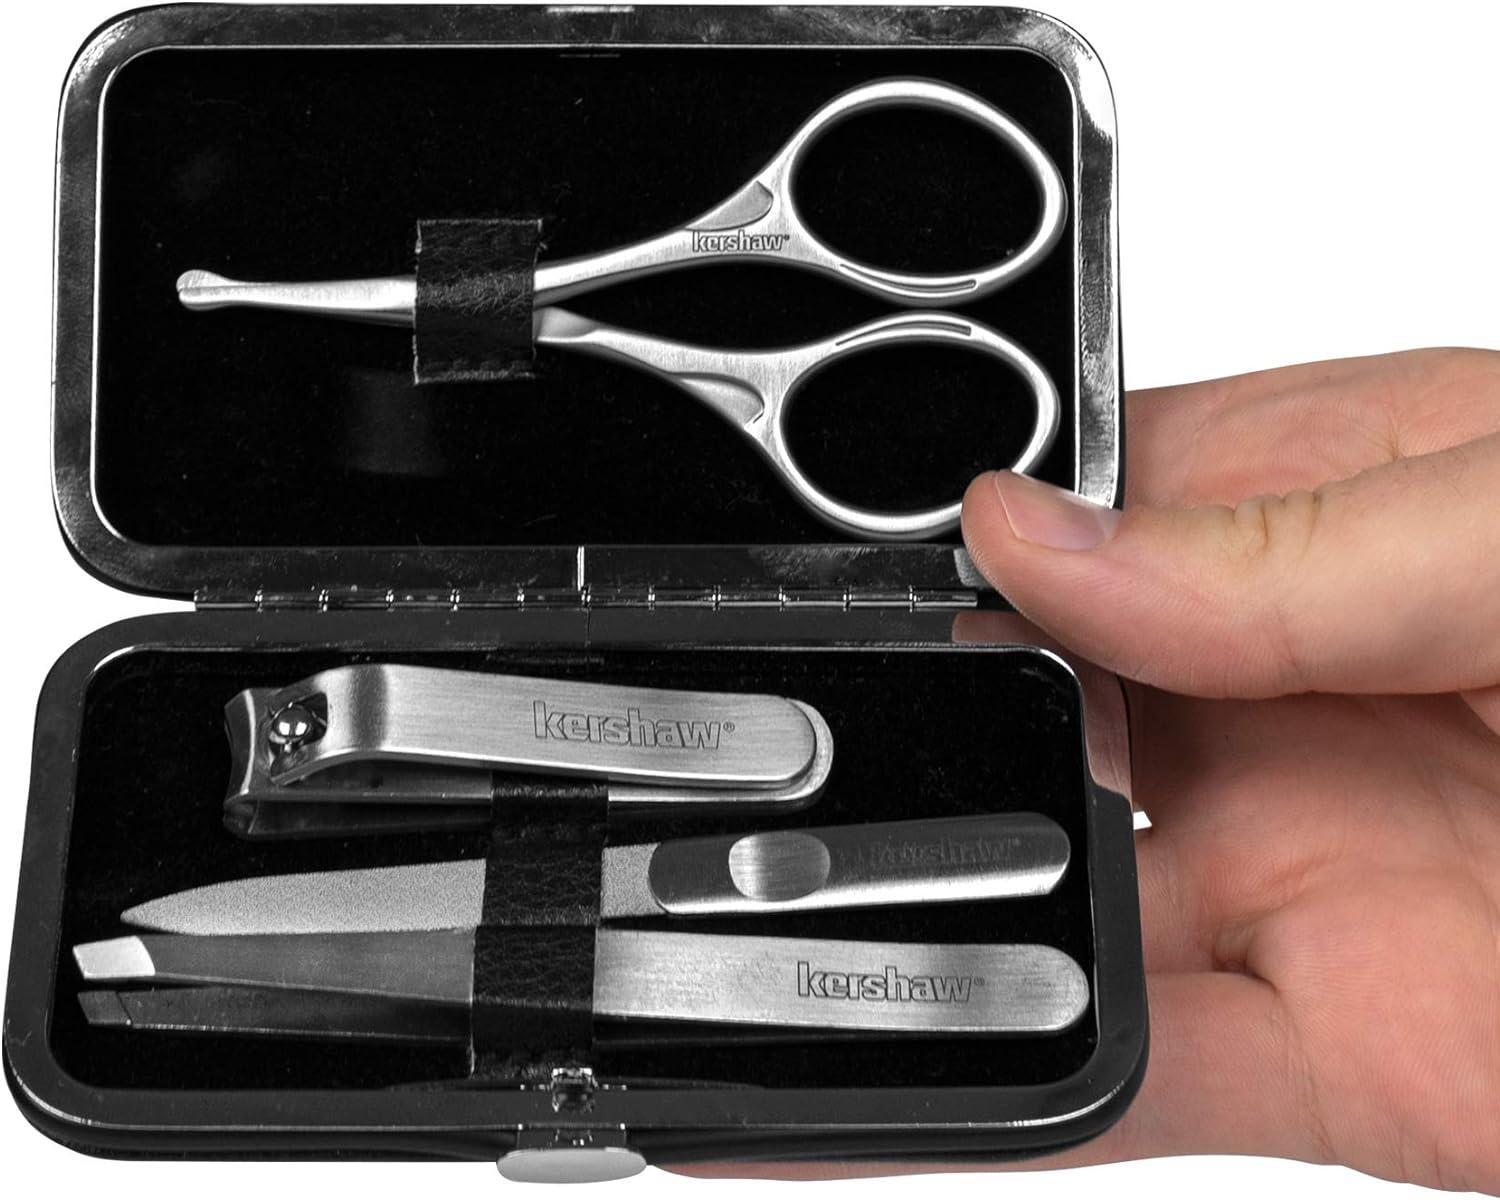 Kershaw Men's Stainless Steel Manicure Set 4-Piece with Case